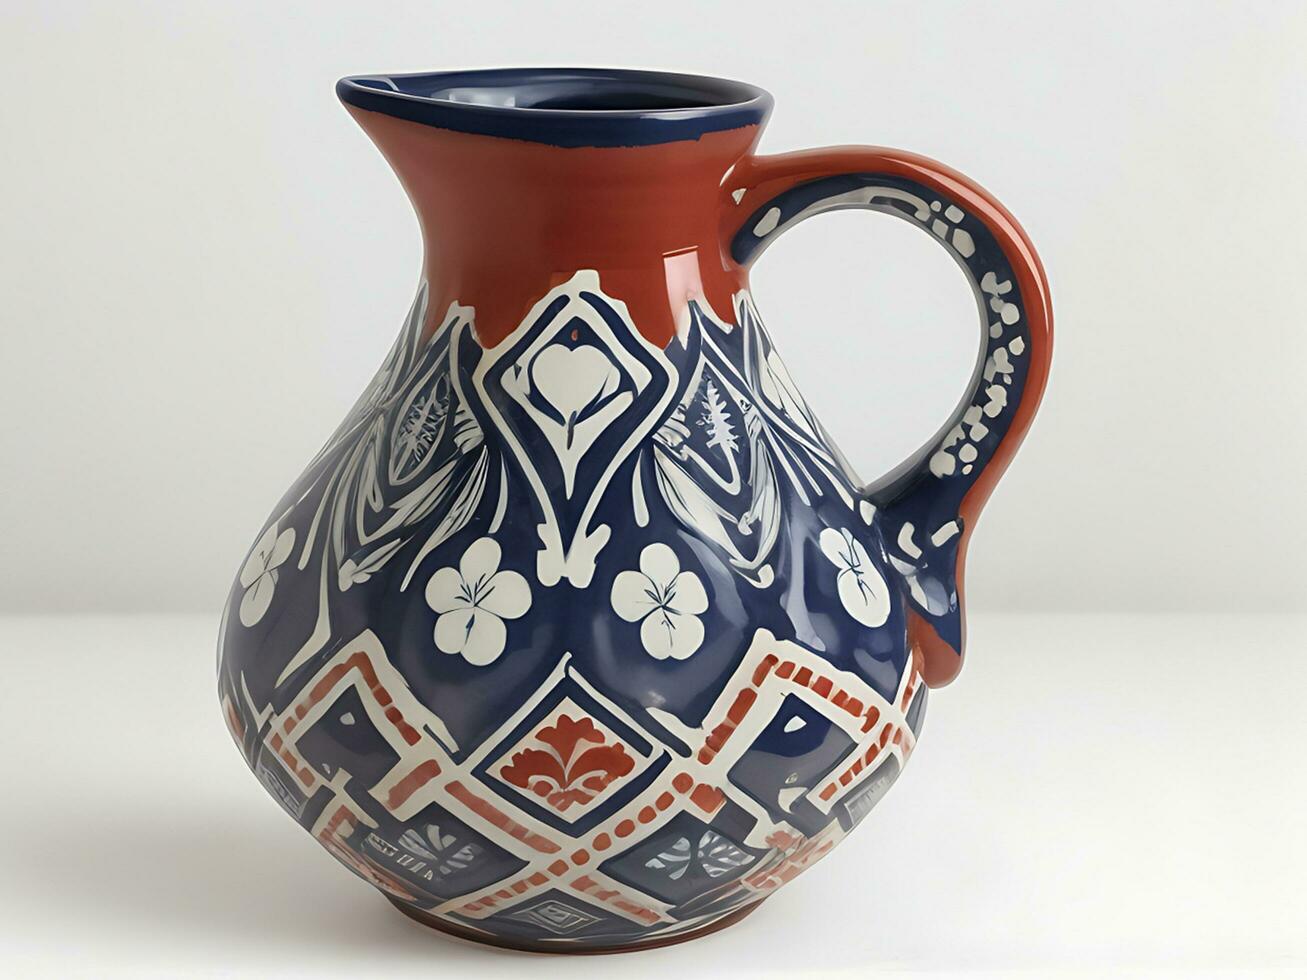 A colorful ceramic jug with a design on the front photo